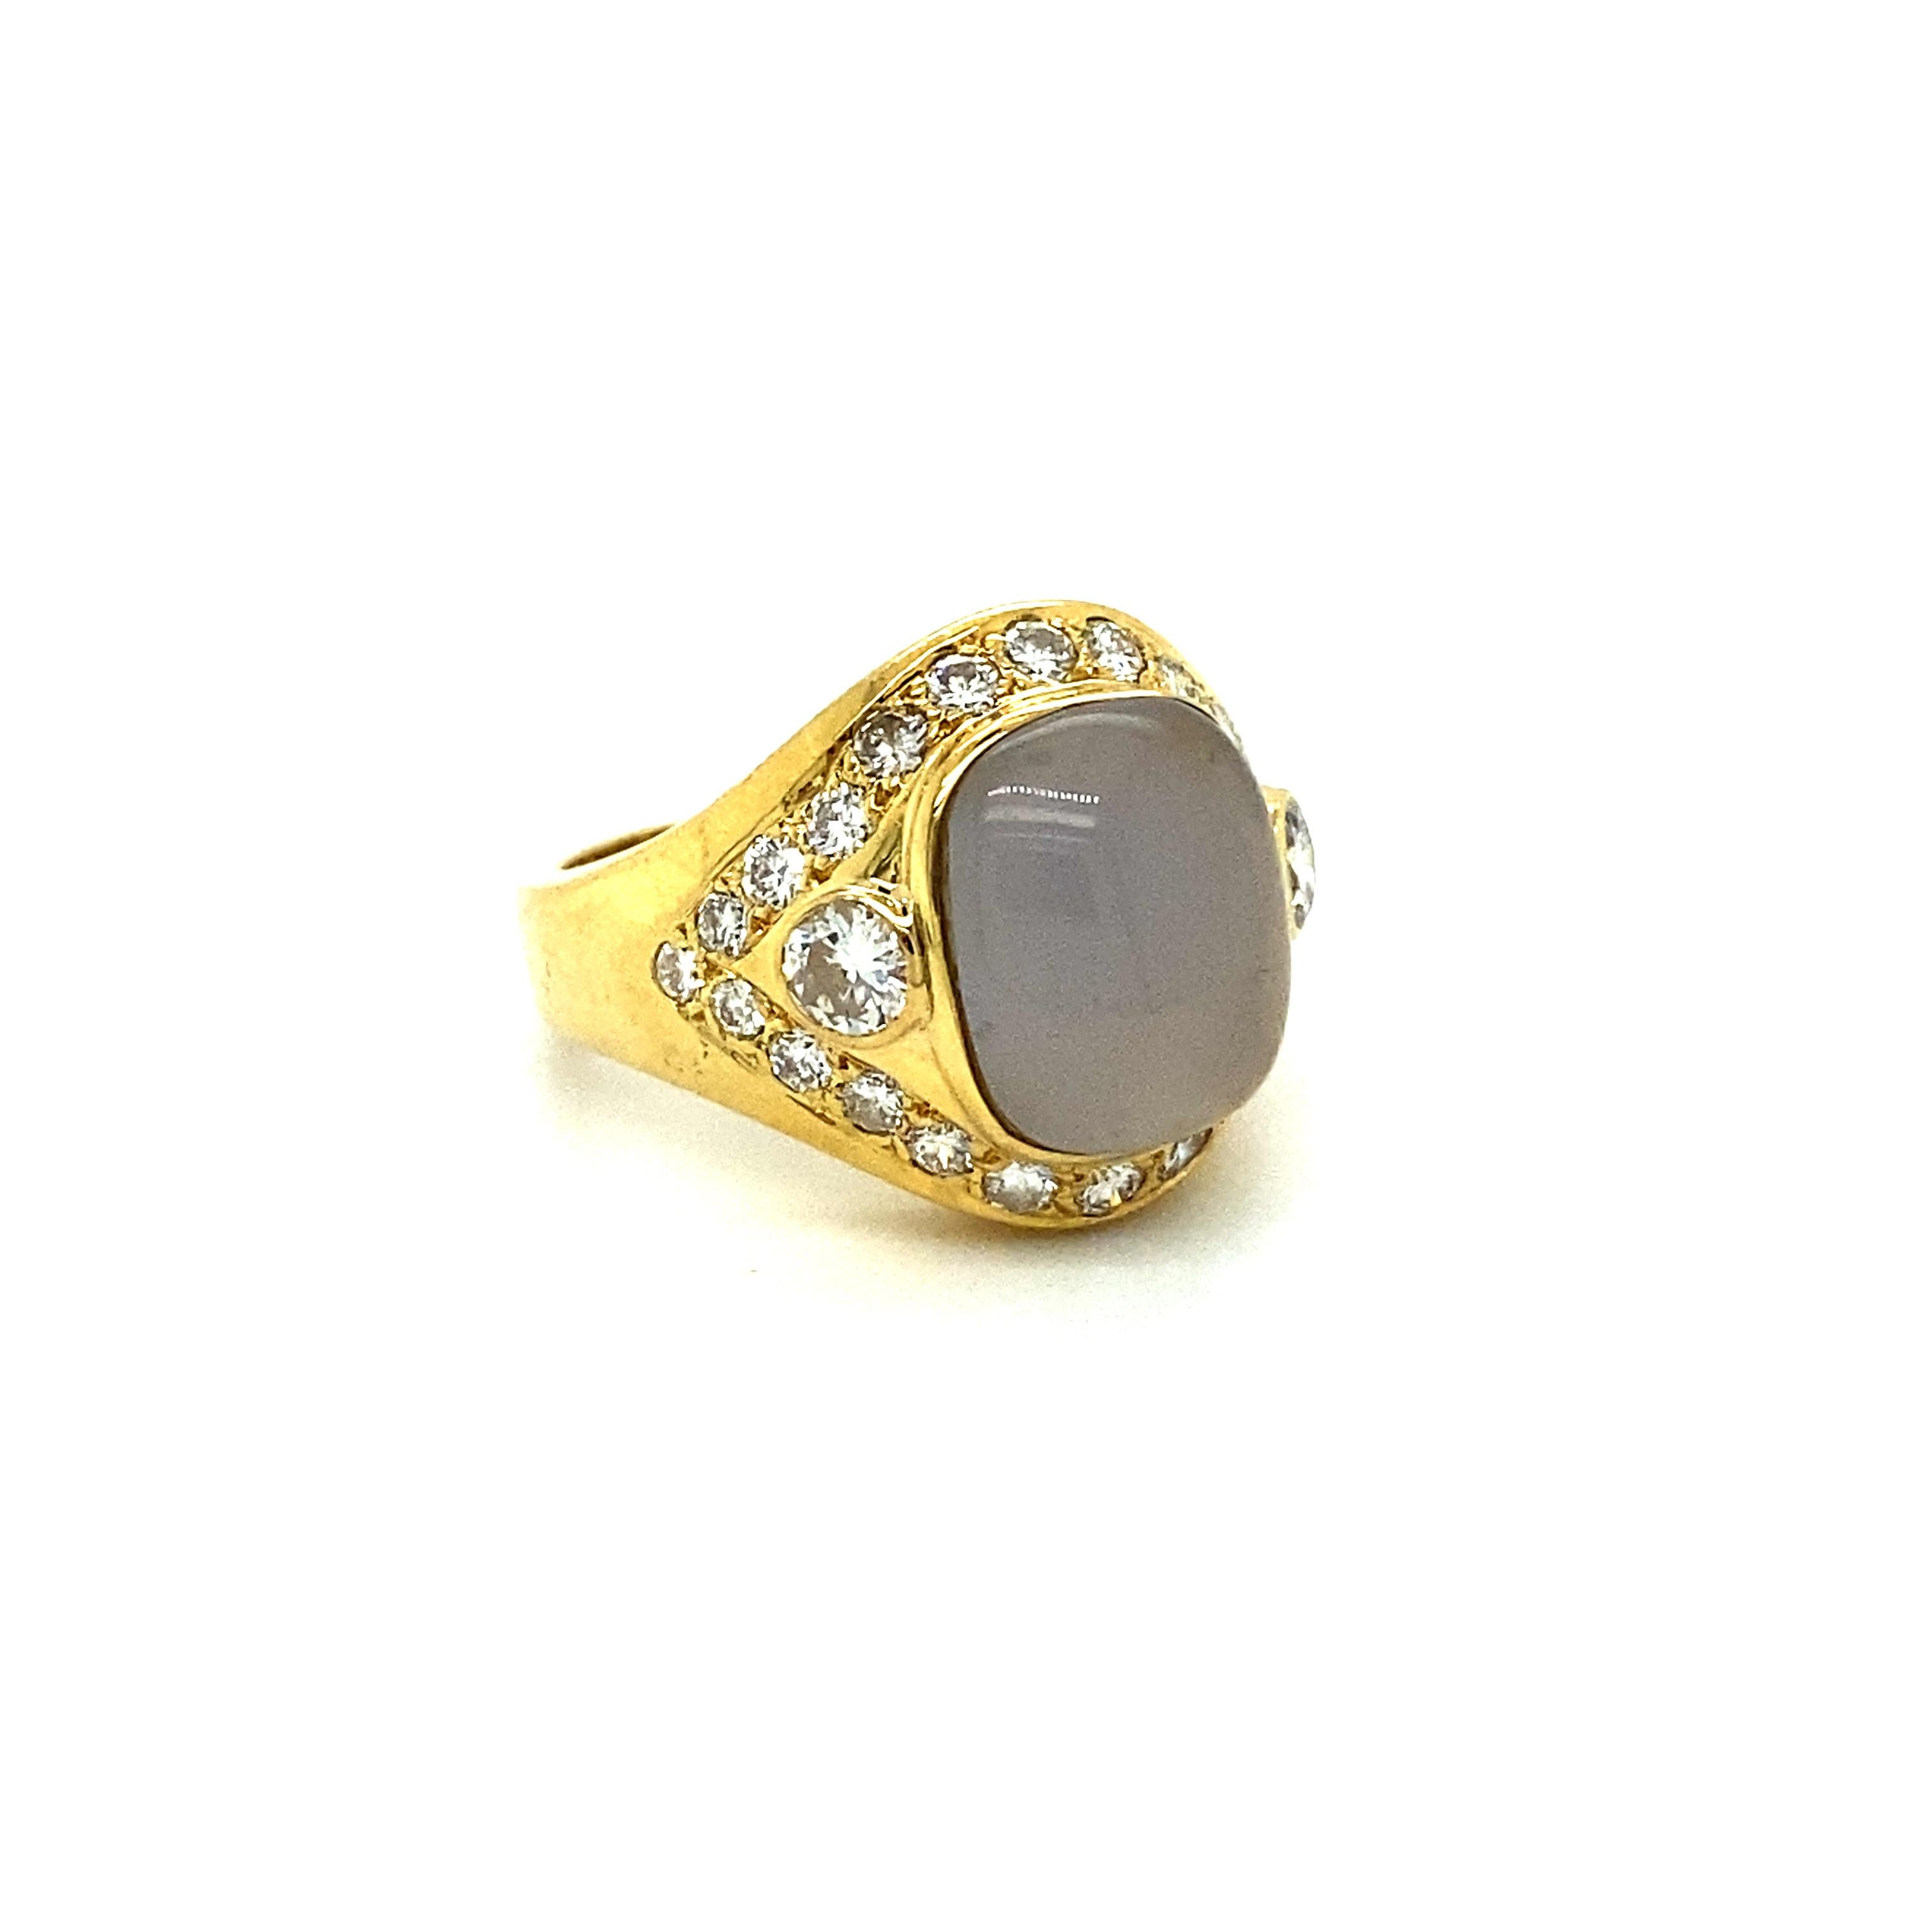 This Amazing Chalcedony and Diamond Engagement Ring is a truly special, one of a kind piece. Crafted in 18K Yellow Gold, the design features a central Bezel Set Cabochon Cut, Cushion Shaped, Light Greyish/Blue Chalcedony, flanked on each side by a